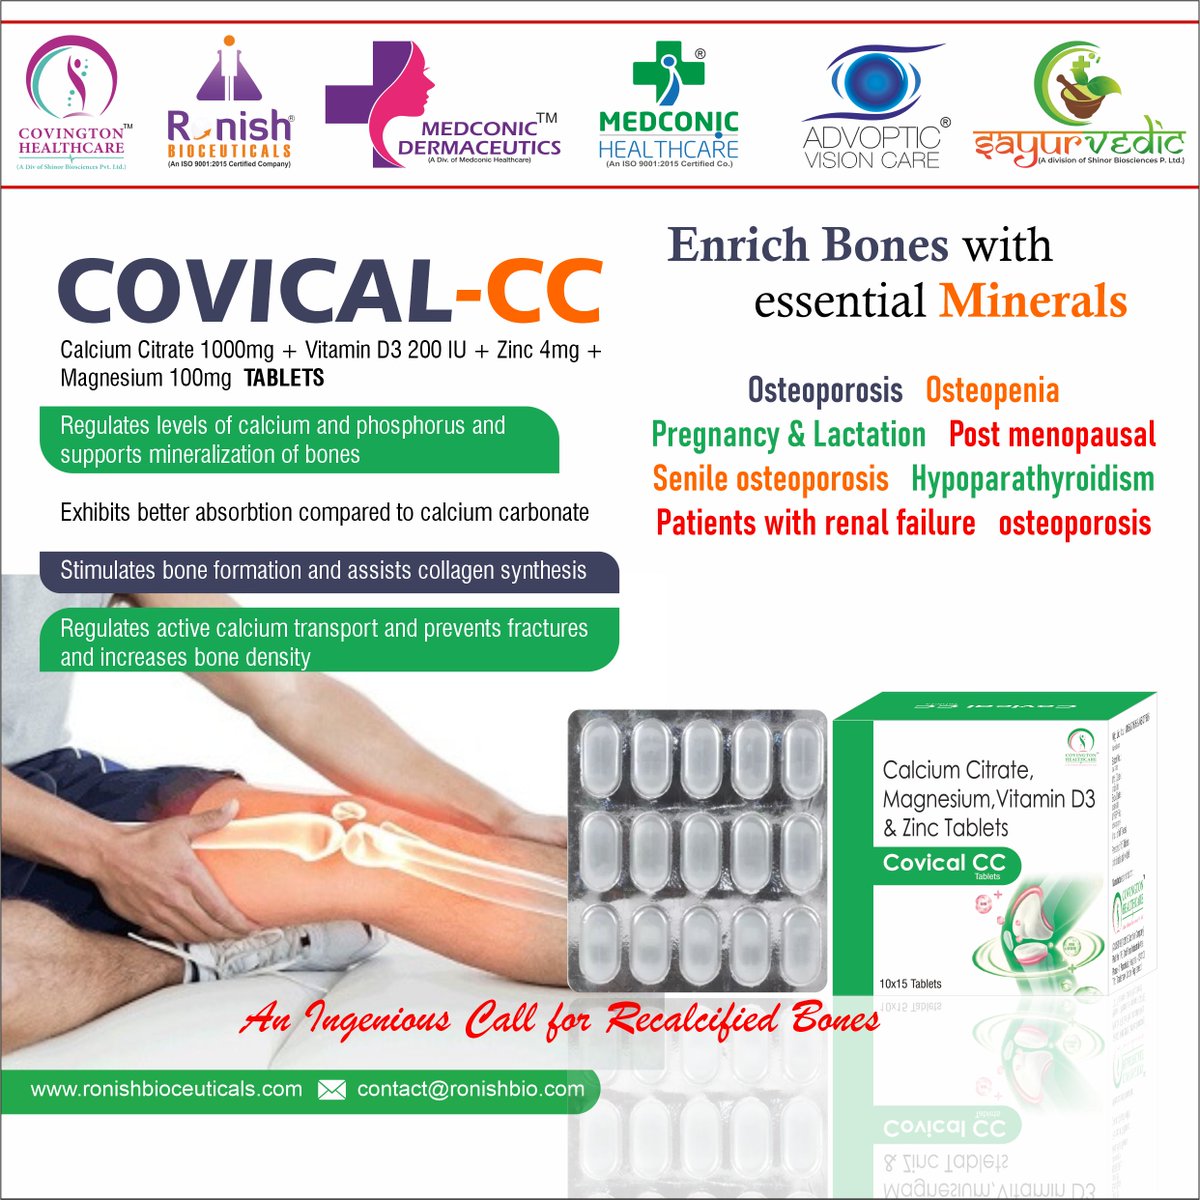 🌟Introducing our latest offering: COVICAL CC 🌟

A powerhouse blend of Calcium Citrate, #VitaminD3, Zinc, and Magnesium, all in one convenient tablet! 💊

#CovingtonHealthcare #CovicalCC #AyurvedicHealth #PCDPharma #FranchiseOpportunity #WellnessJourney #HealthIsWealth